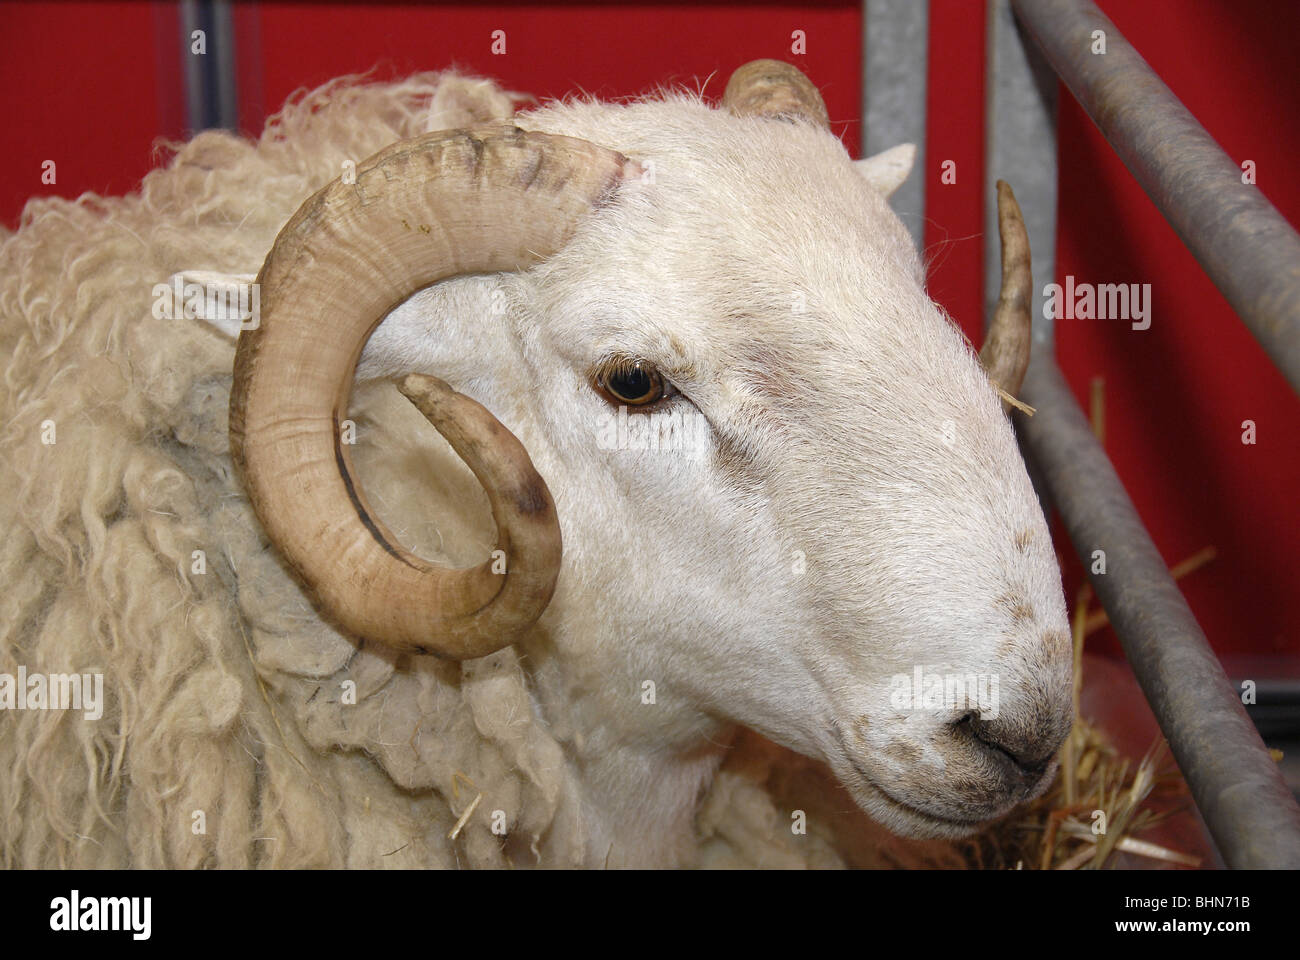 Close-up head shot of penned Dorset Horned Poll sheep at agricultural/countryside show Stock Photo